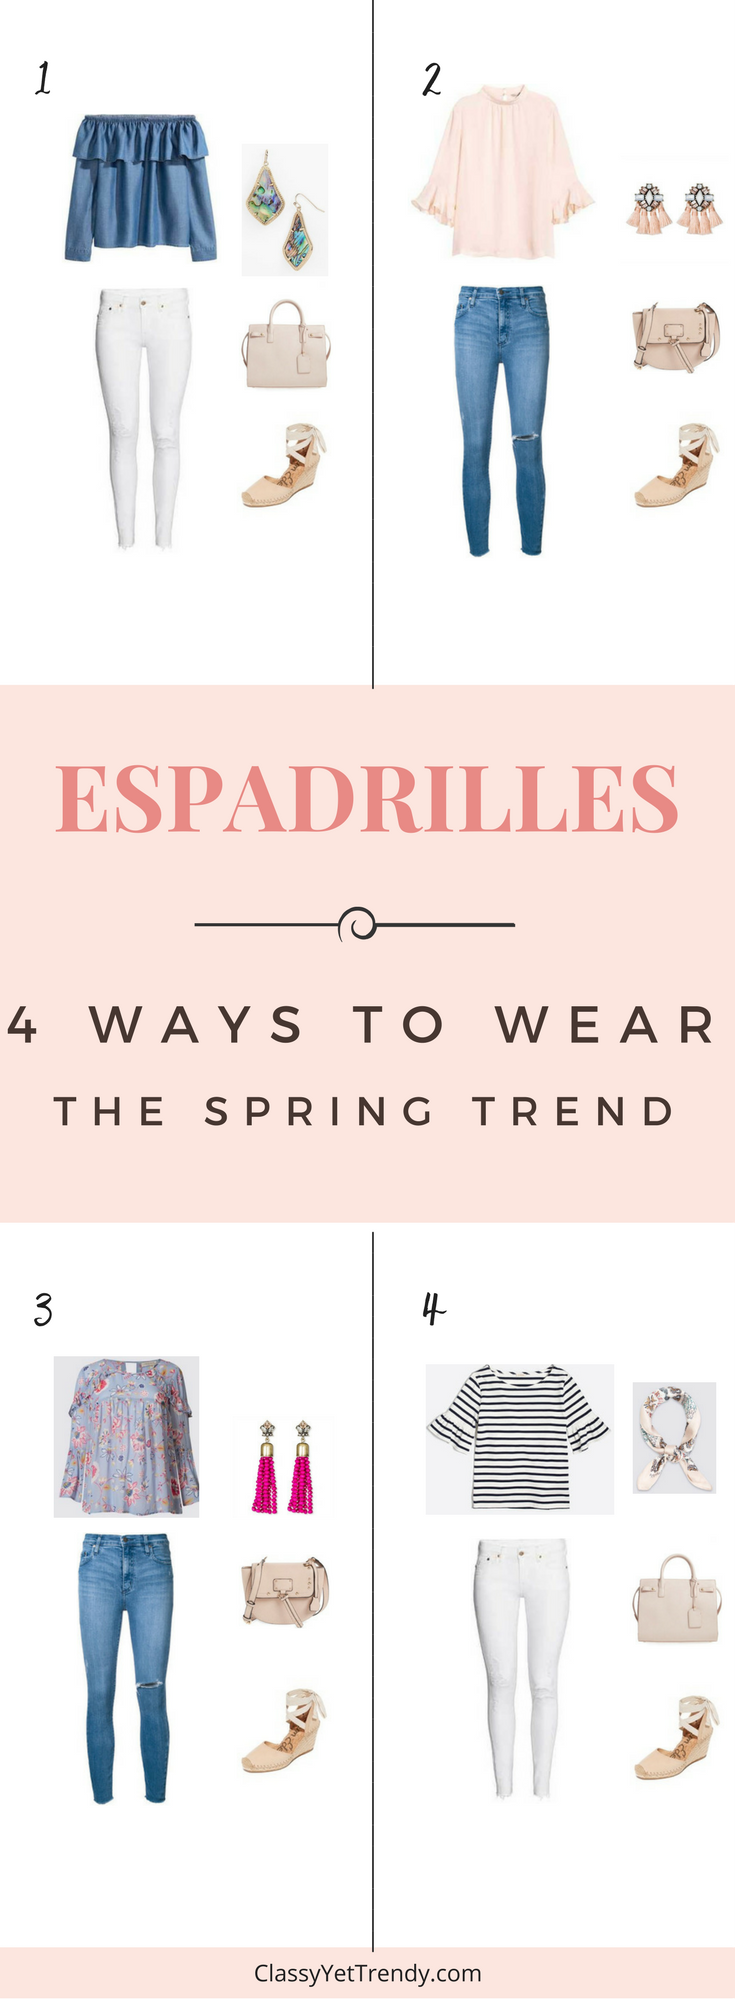 4 Ways To Wear Espadrilles for Spring